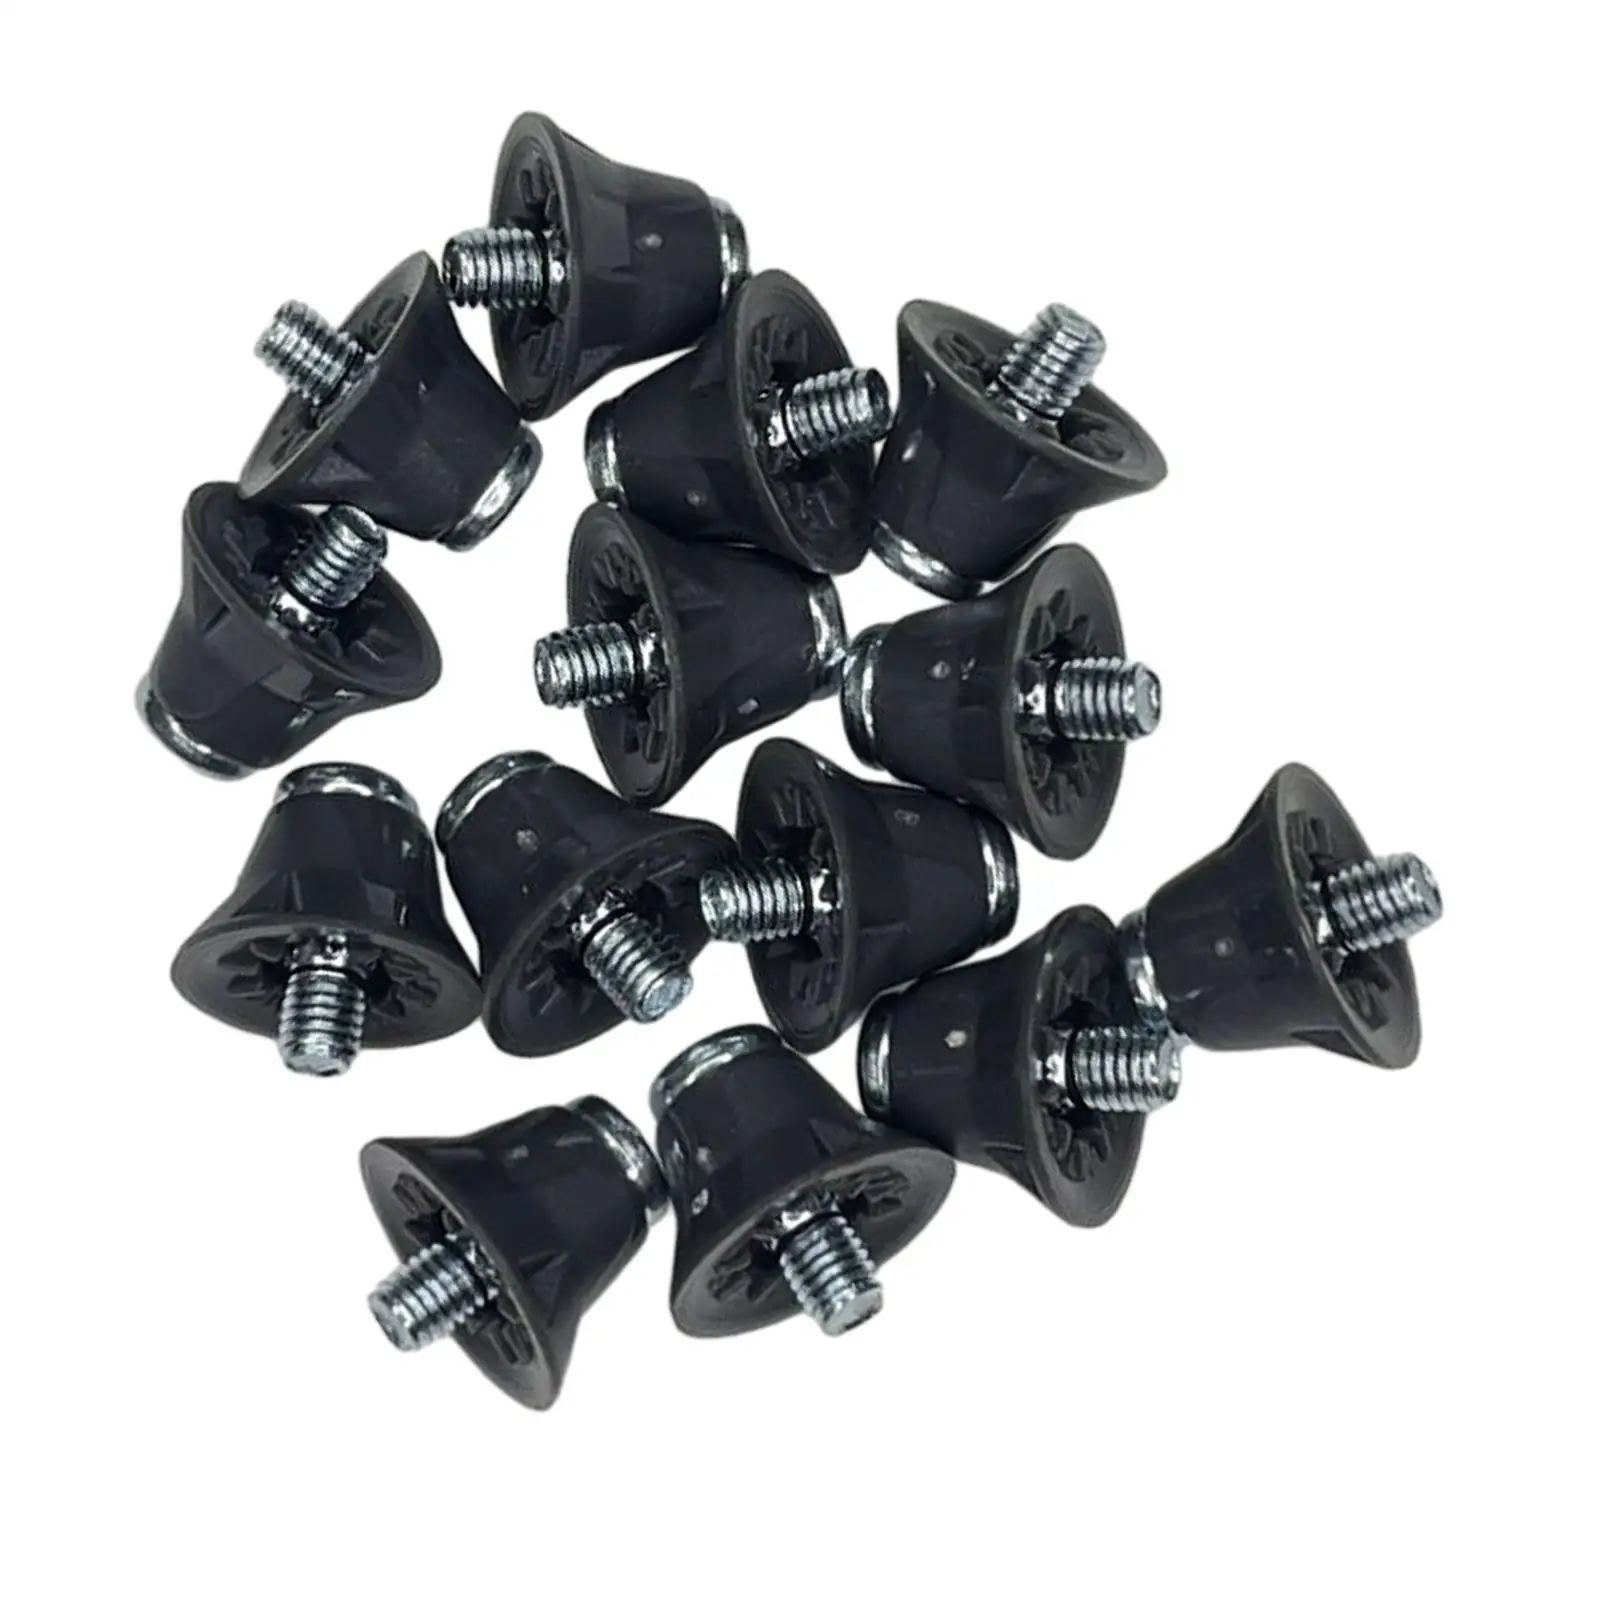 14Pcs Rugby Studs Replacement Spikes M5 Threaded Turf Football Boot Spikes Soccer Shoe Spikes for Athletic Sneakers Training